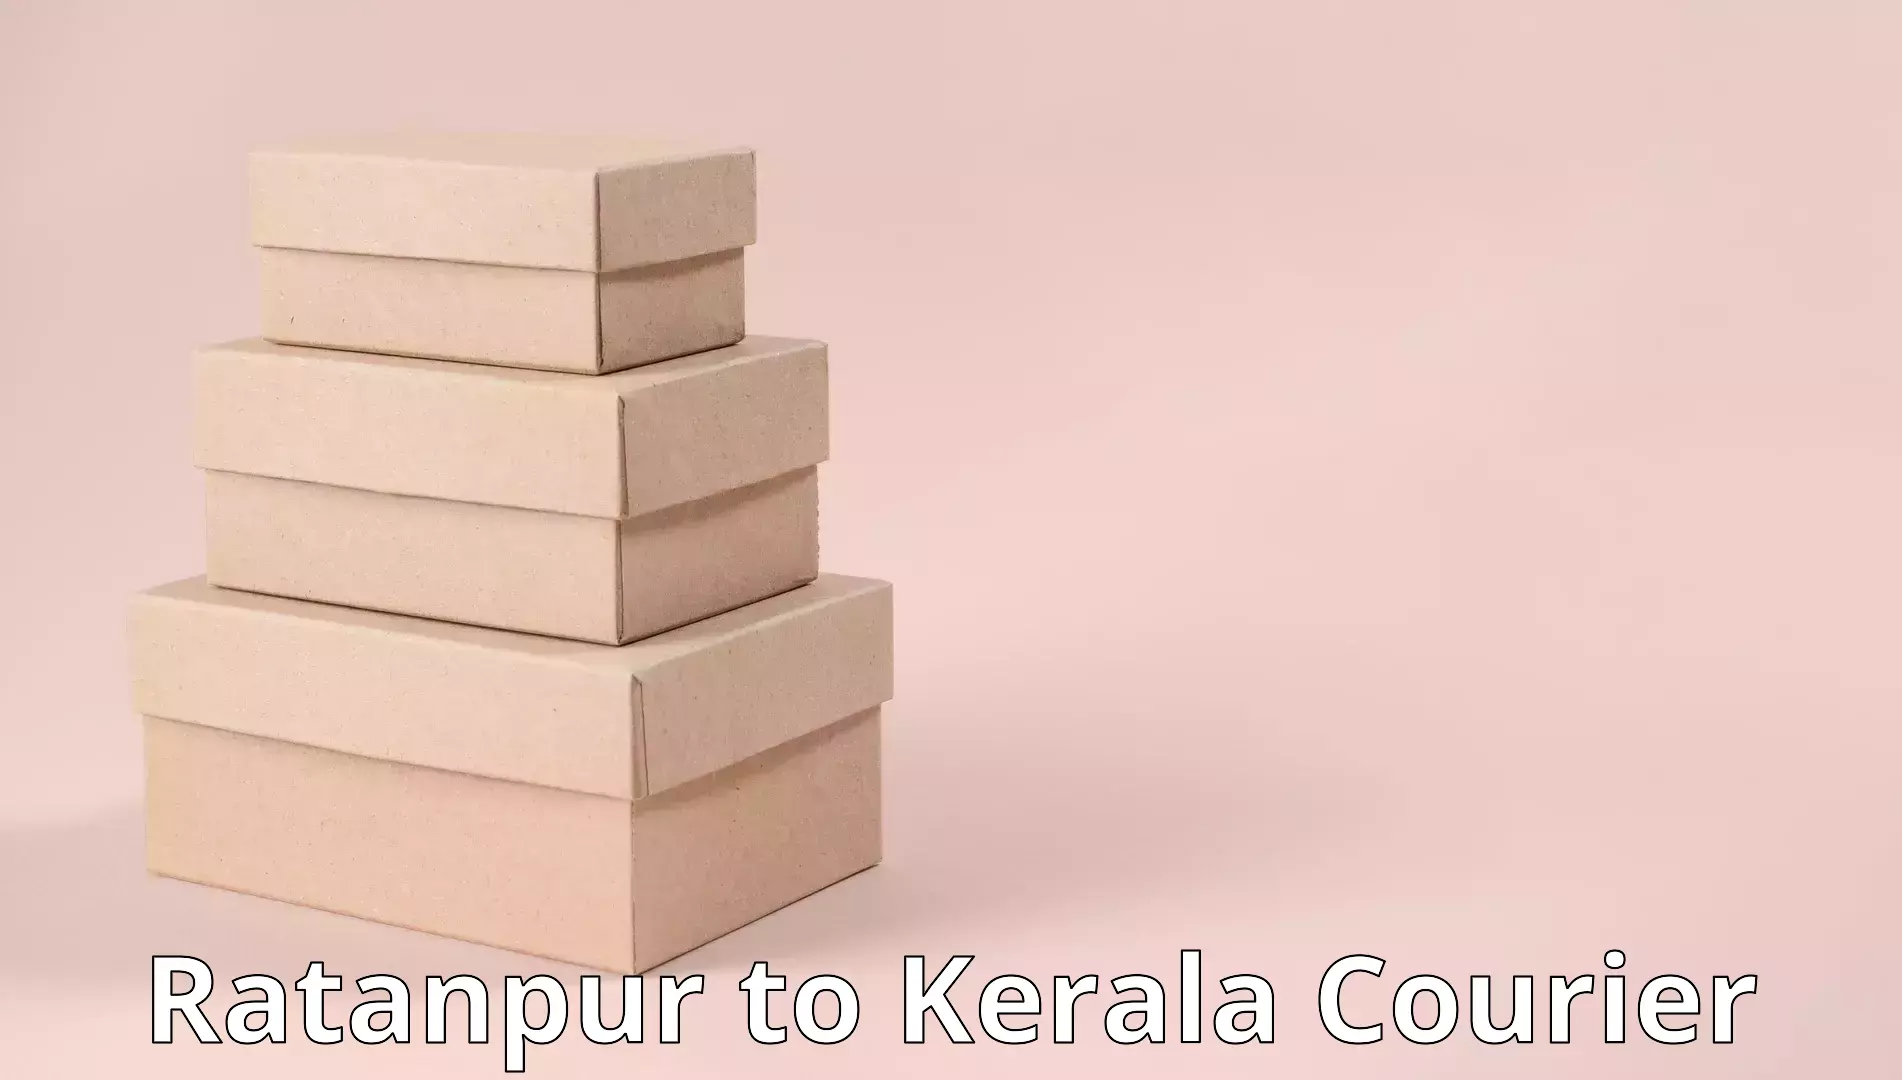 Furniture moving specialists in Ratanpur to Kerala